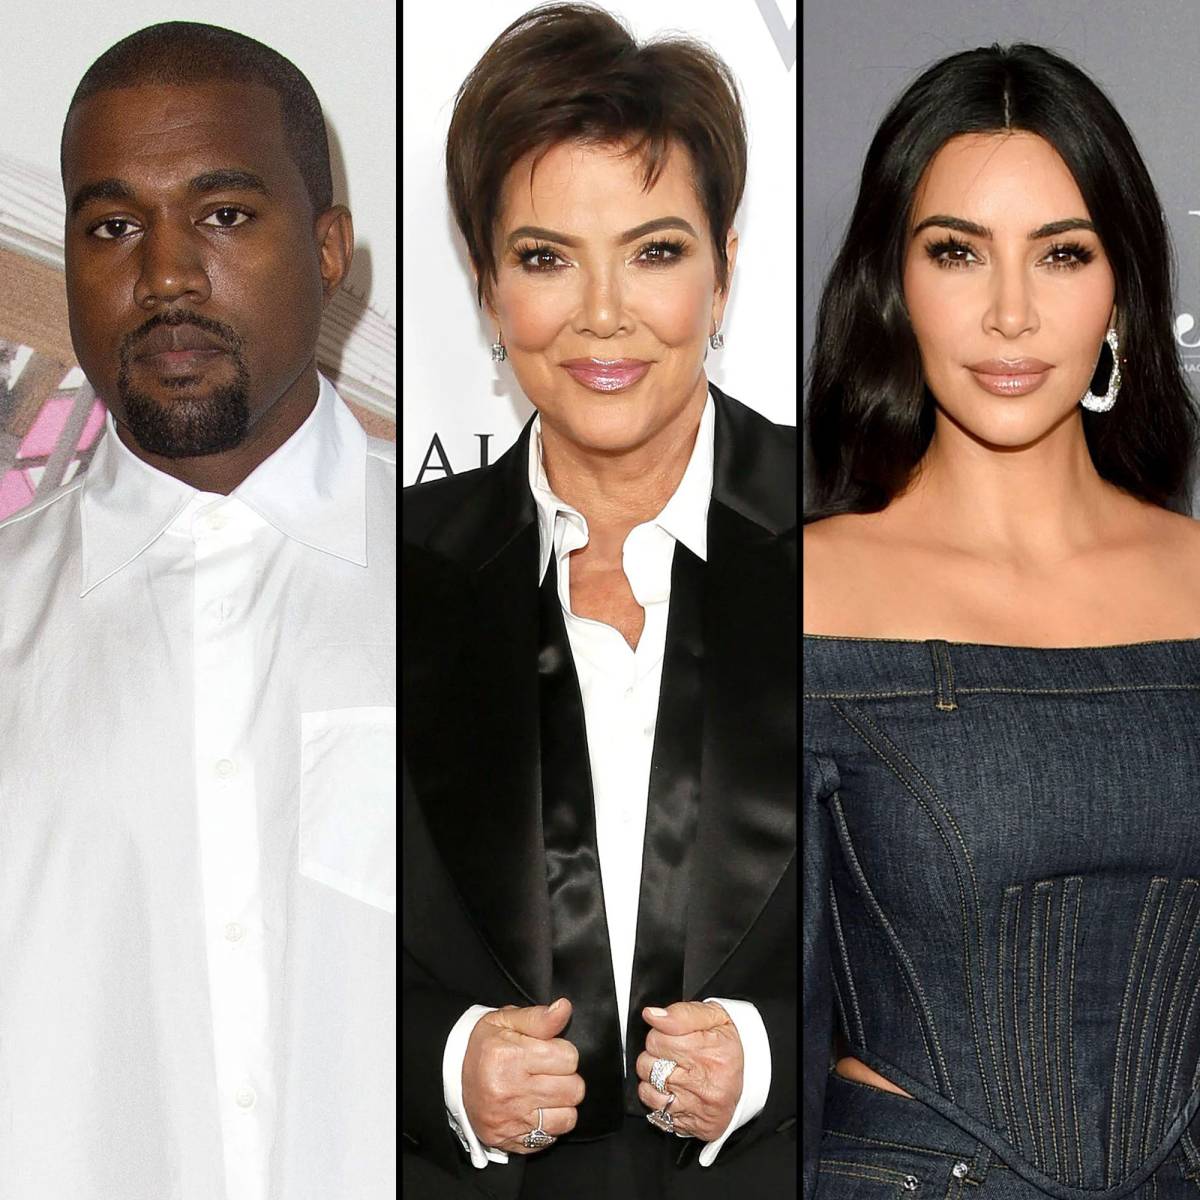 Anandhi Sexvideo - Kanye West Calls Out Kris Jenner, Claims Porn 'Destroyed' Family